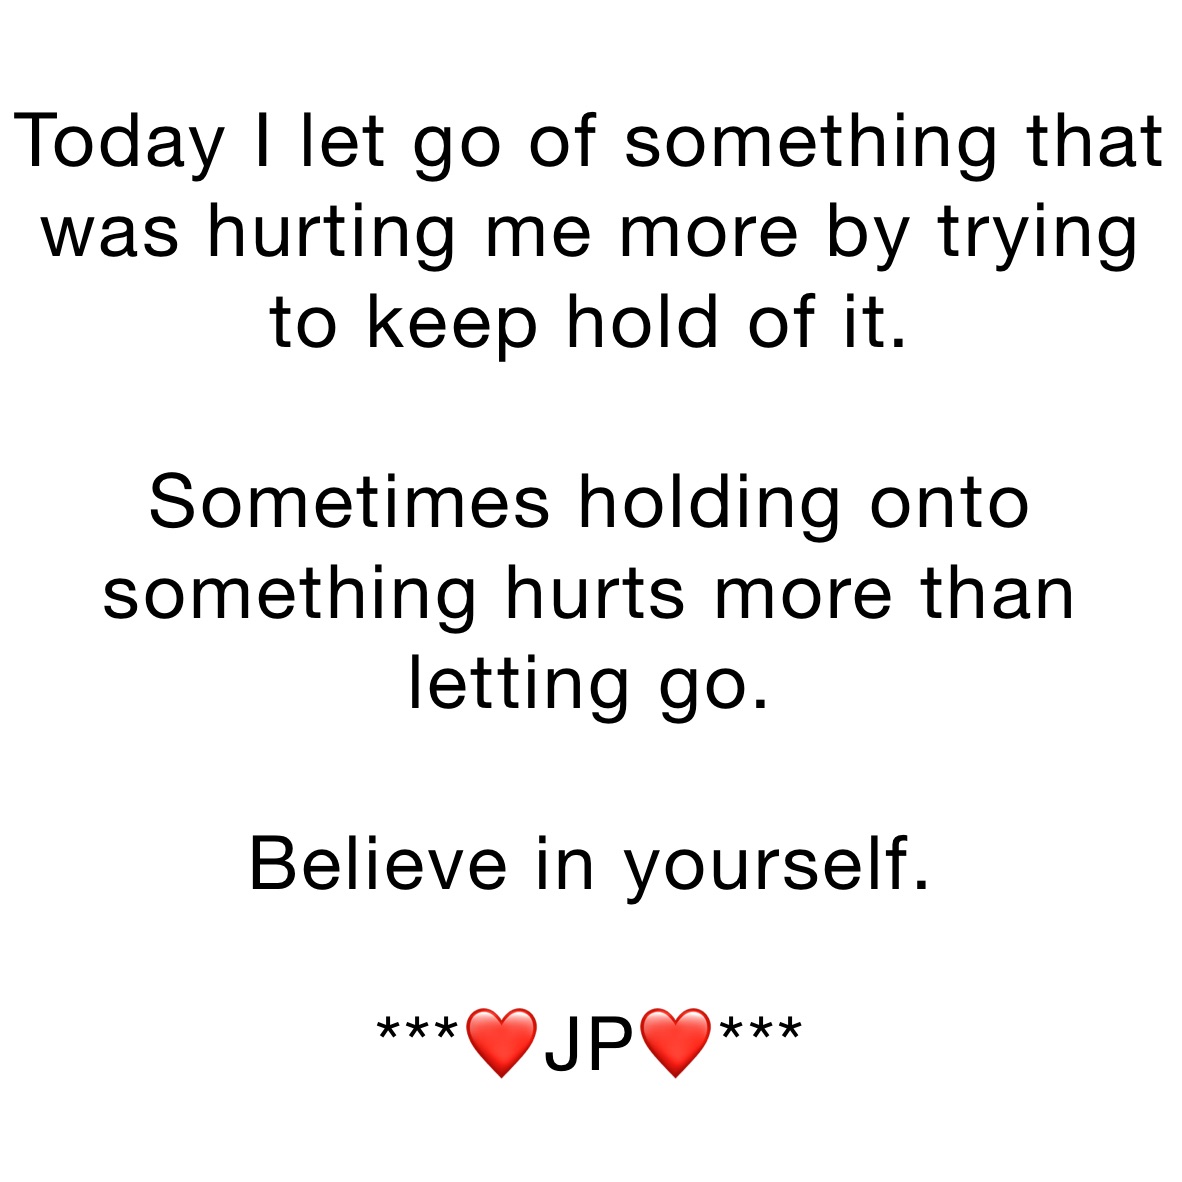 Today I let go of something that was hurting me more by trying to keep hold of it. 

Sometimes holding onto something hurts more than letting go. 

Believe in yourself.

***❤️JP❤️***